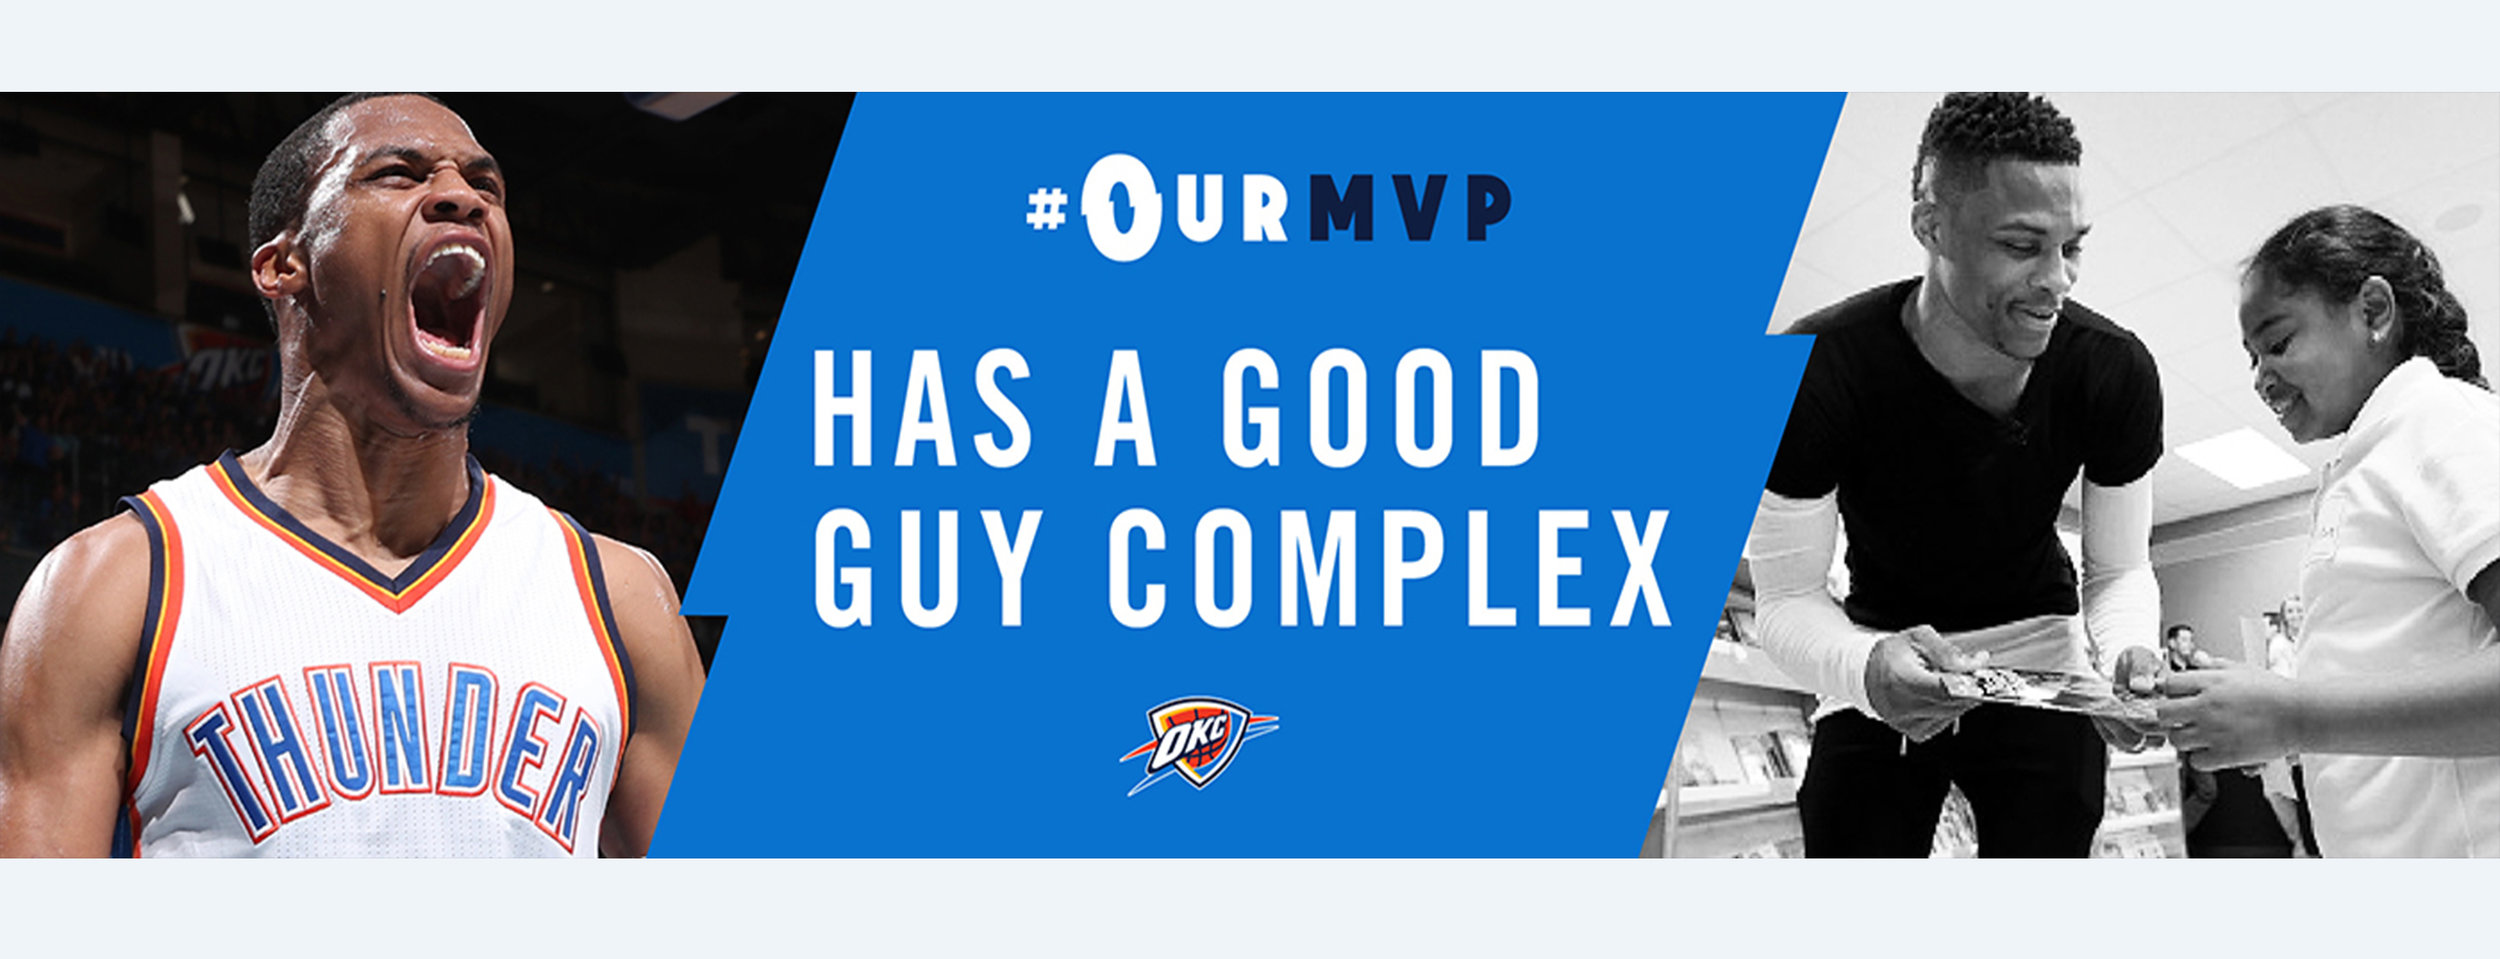 #OurMVP_3_cropped.jpg